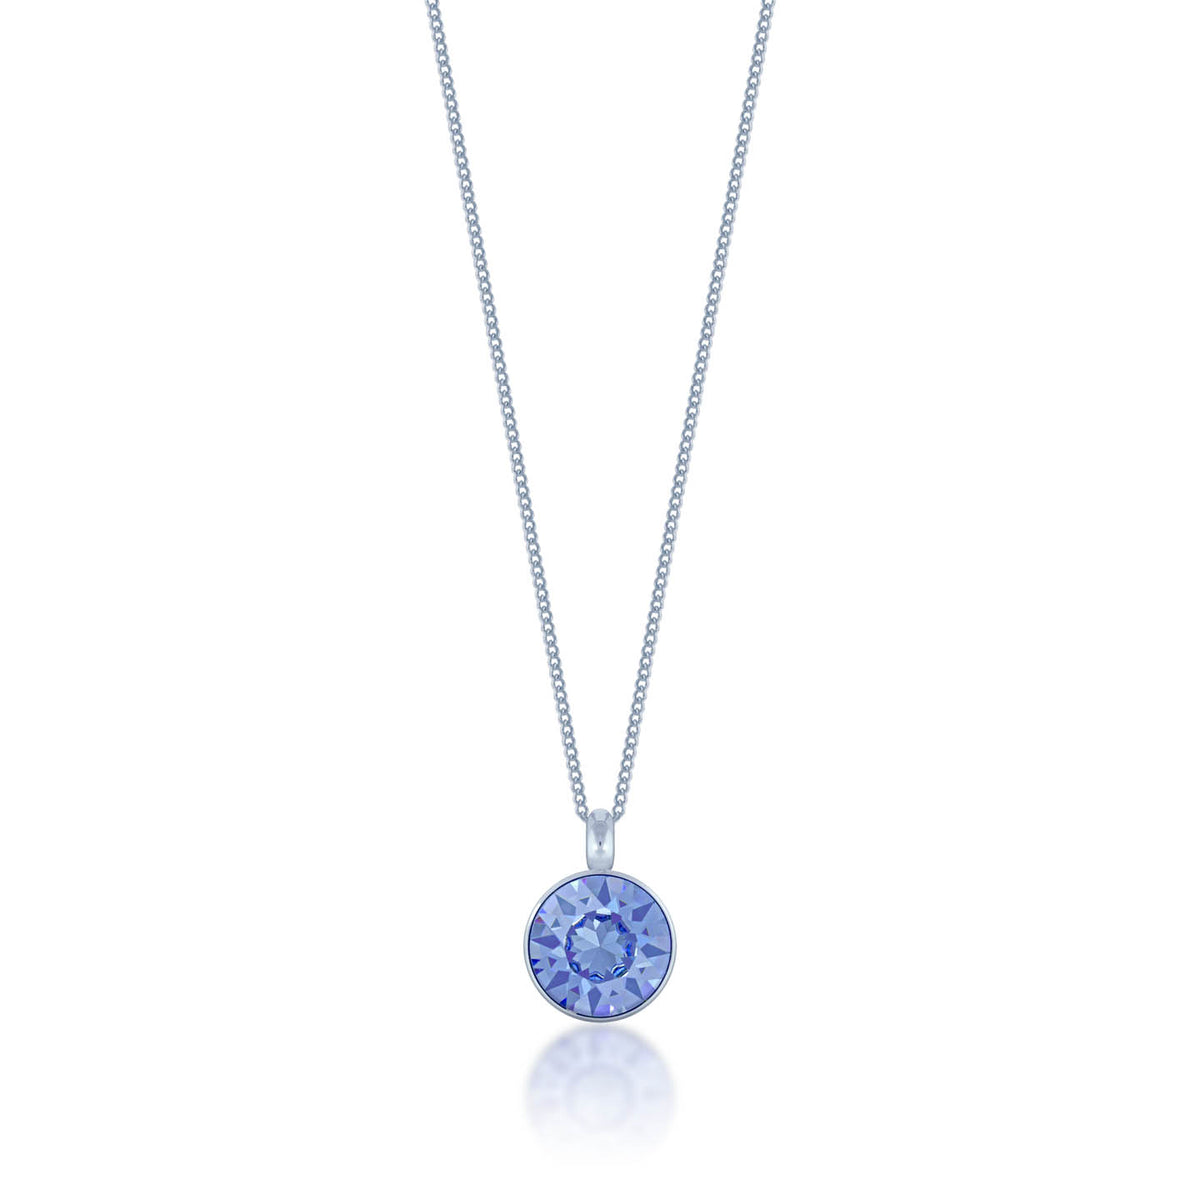 Bella Pendant Necklace with Blue Light Sapphire Round Crystals from Swarovski Silver Toned Rhodium Plated - Ed Heart